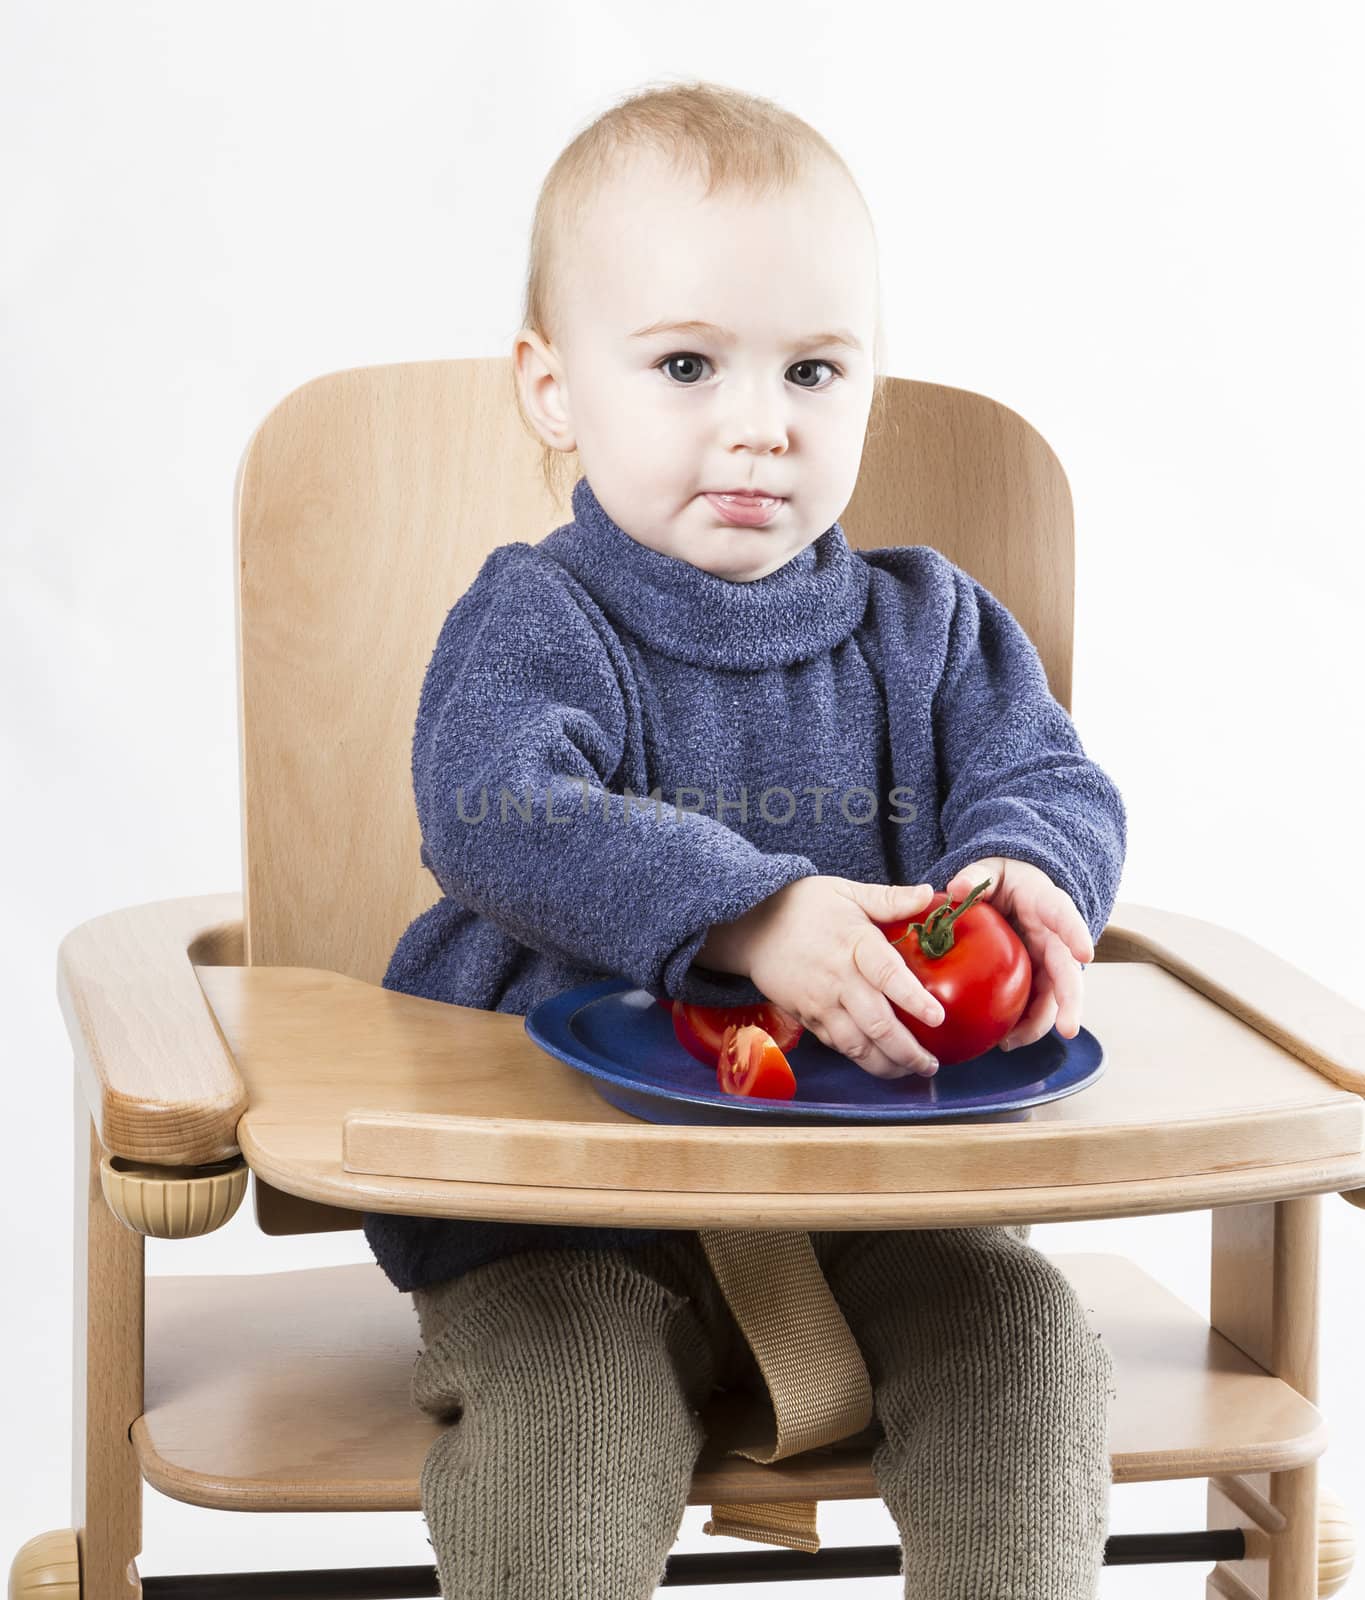 young child eating in high chair. neutral grey background